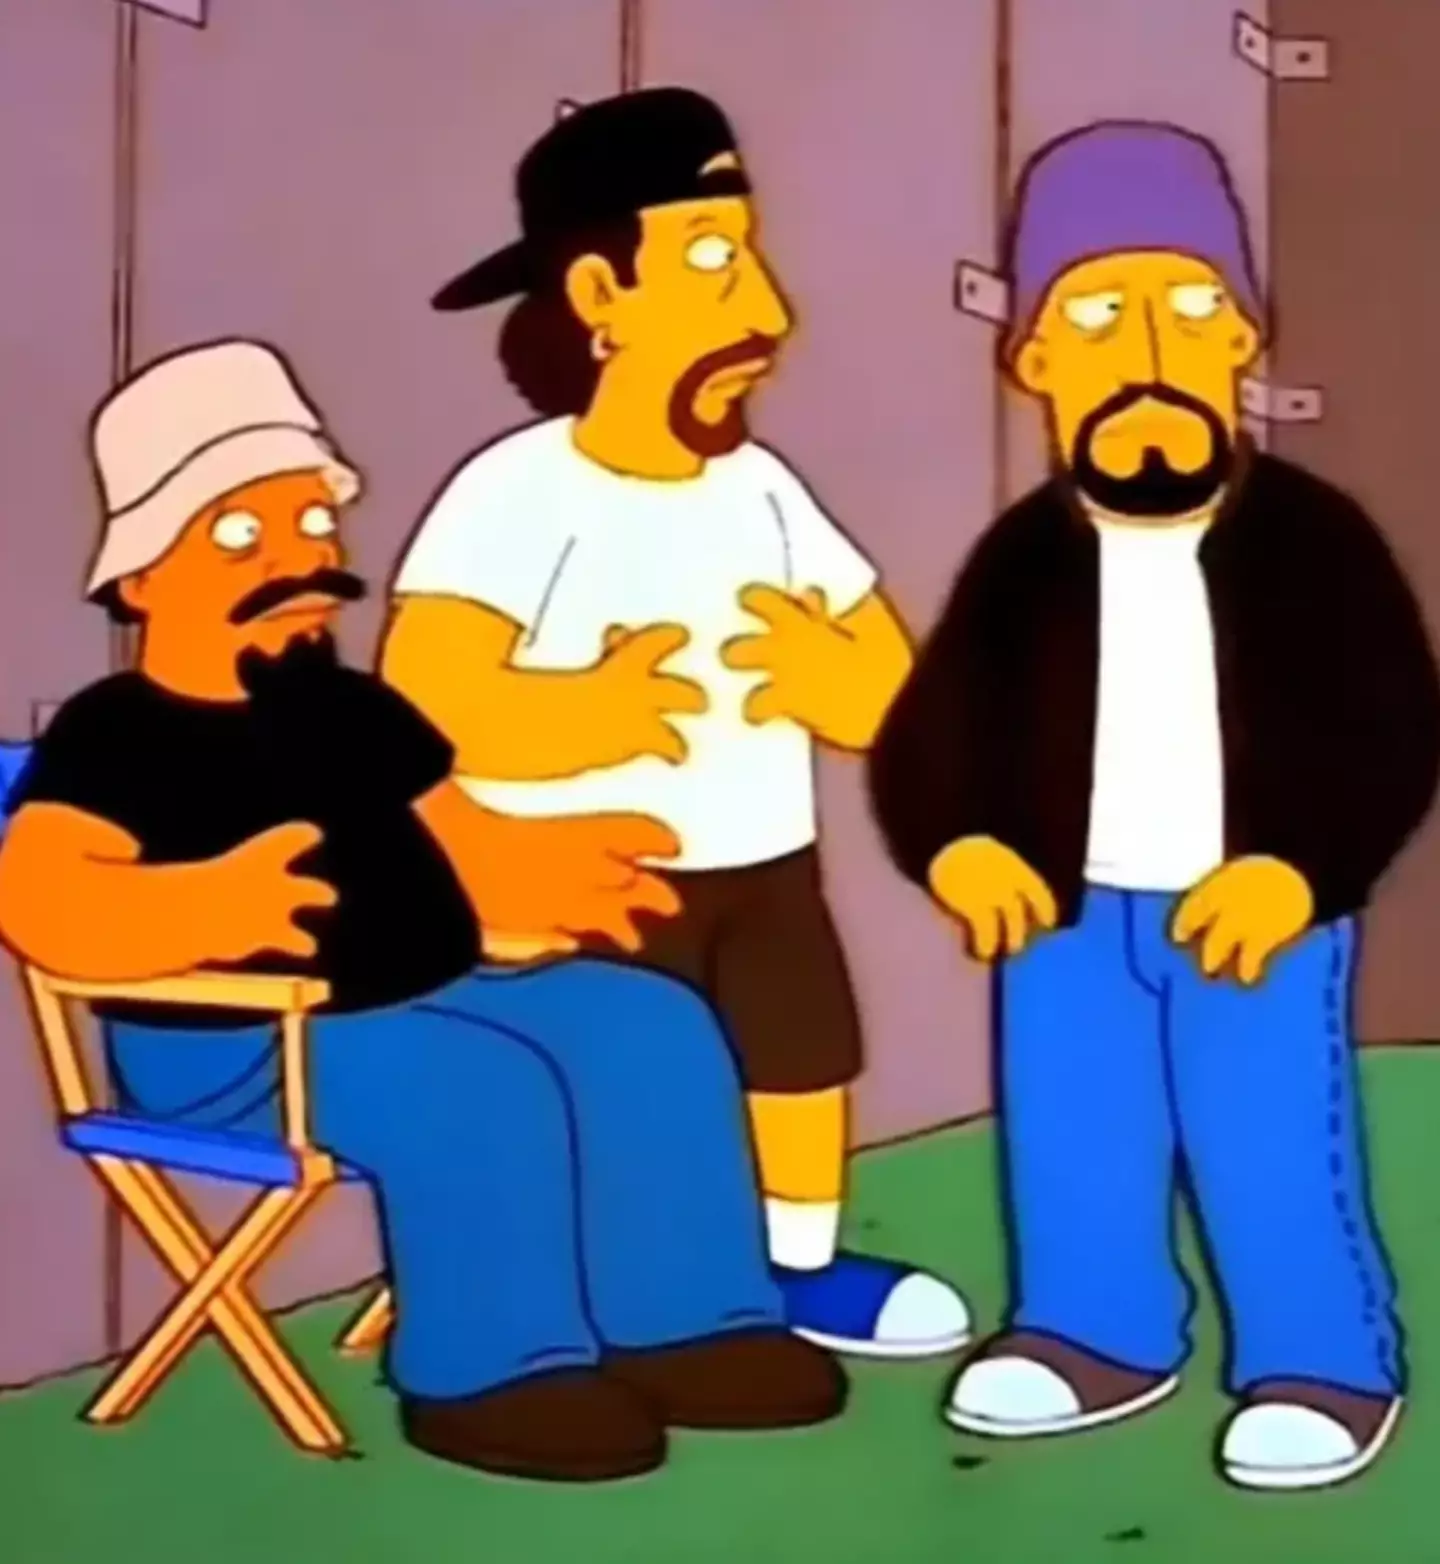 Cypress Hill featured in the 'Homerpalooza' episode, which first aired in 1996.